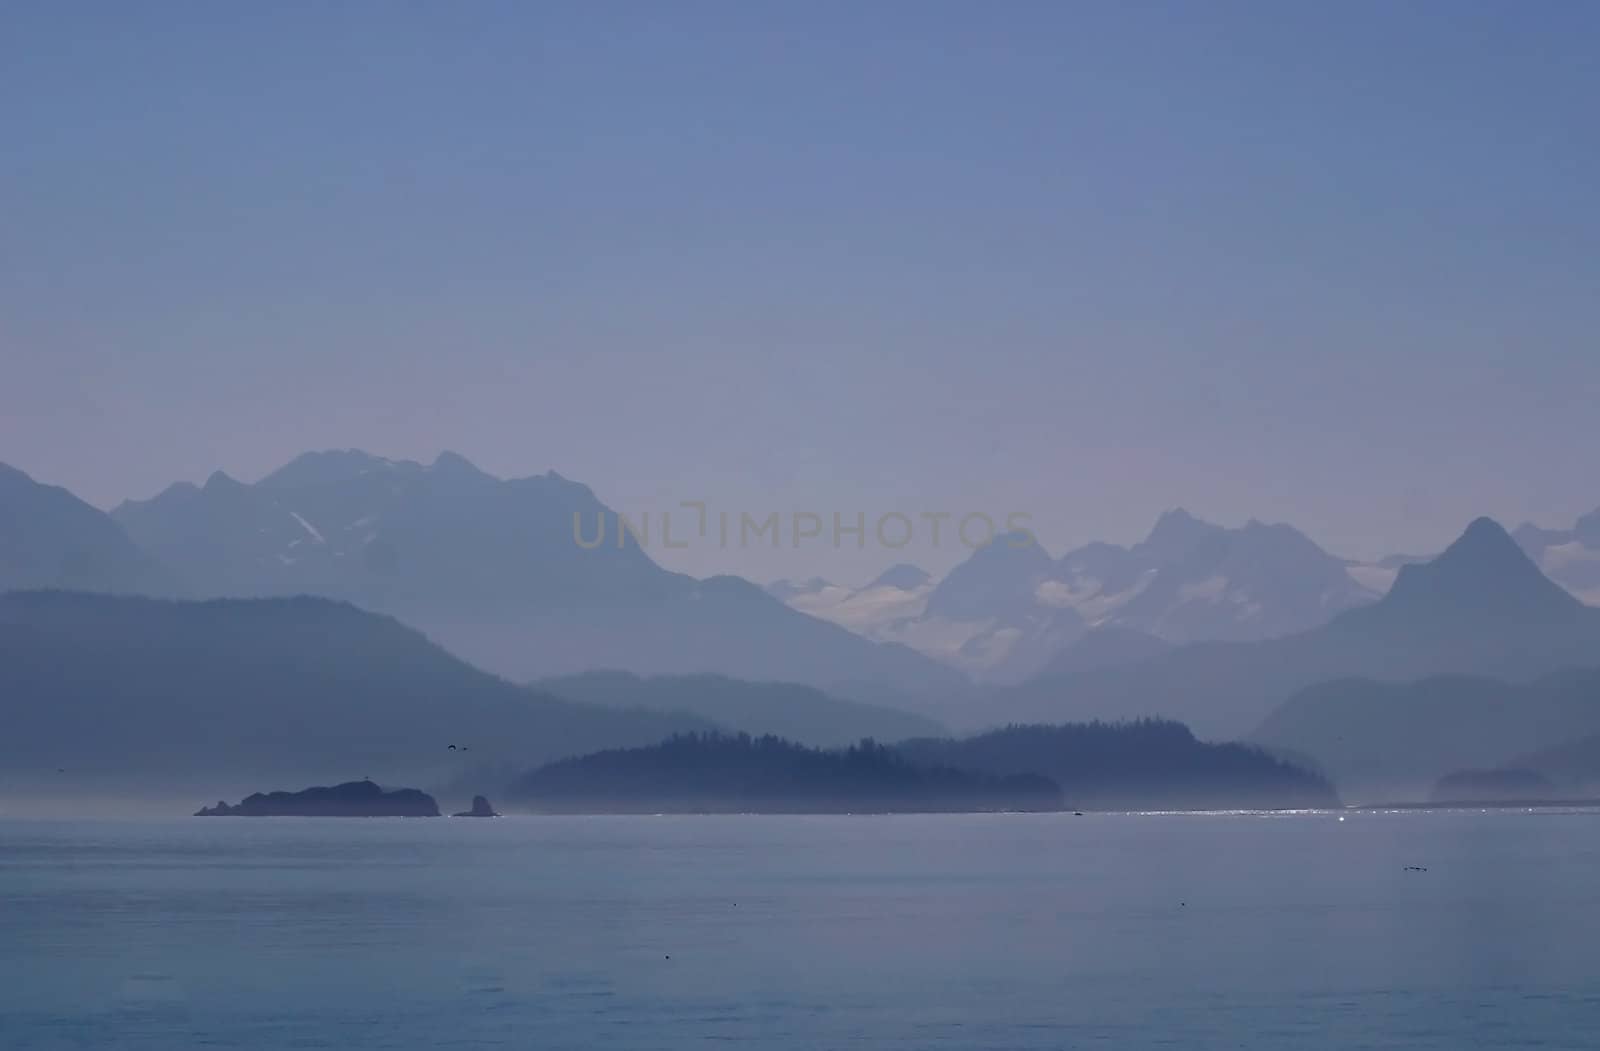 Mountains and glaciers seem shrouded in mystery as day breaks over the misty, chilly waters of Katchemak Bay off the Kenai Penninsula in Alaska